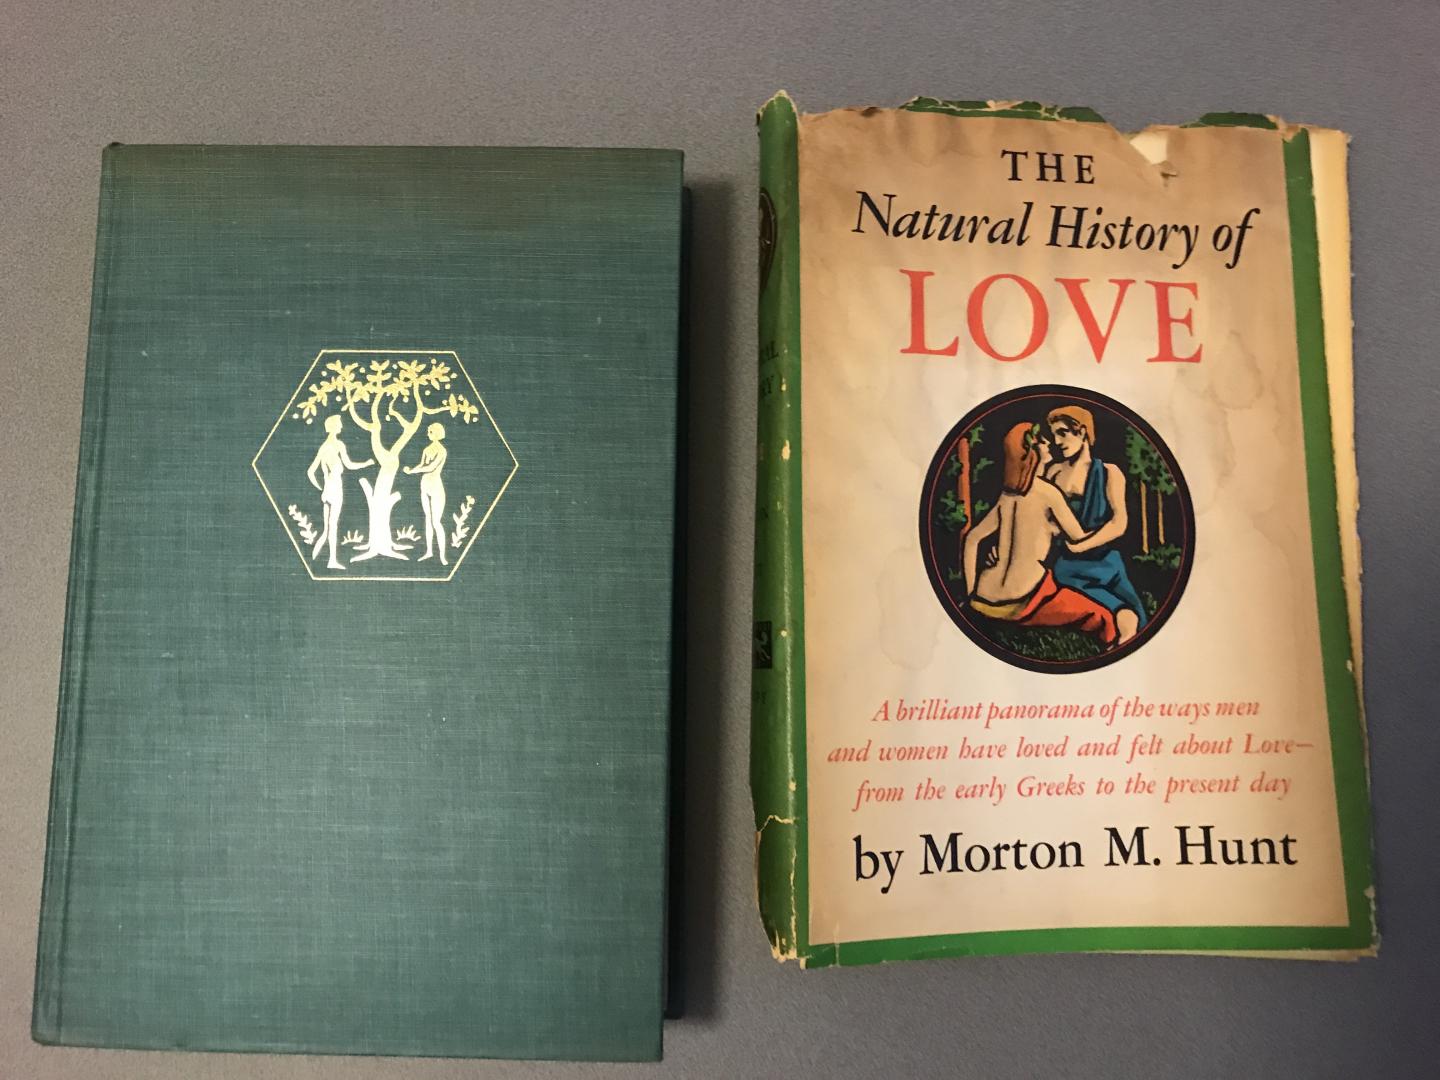 Hunt, Morton M - The Naturel History of Love, from early Greeks to present day